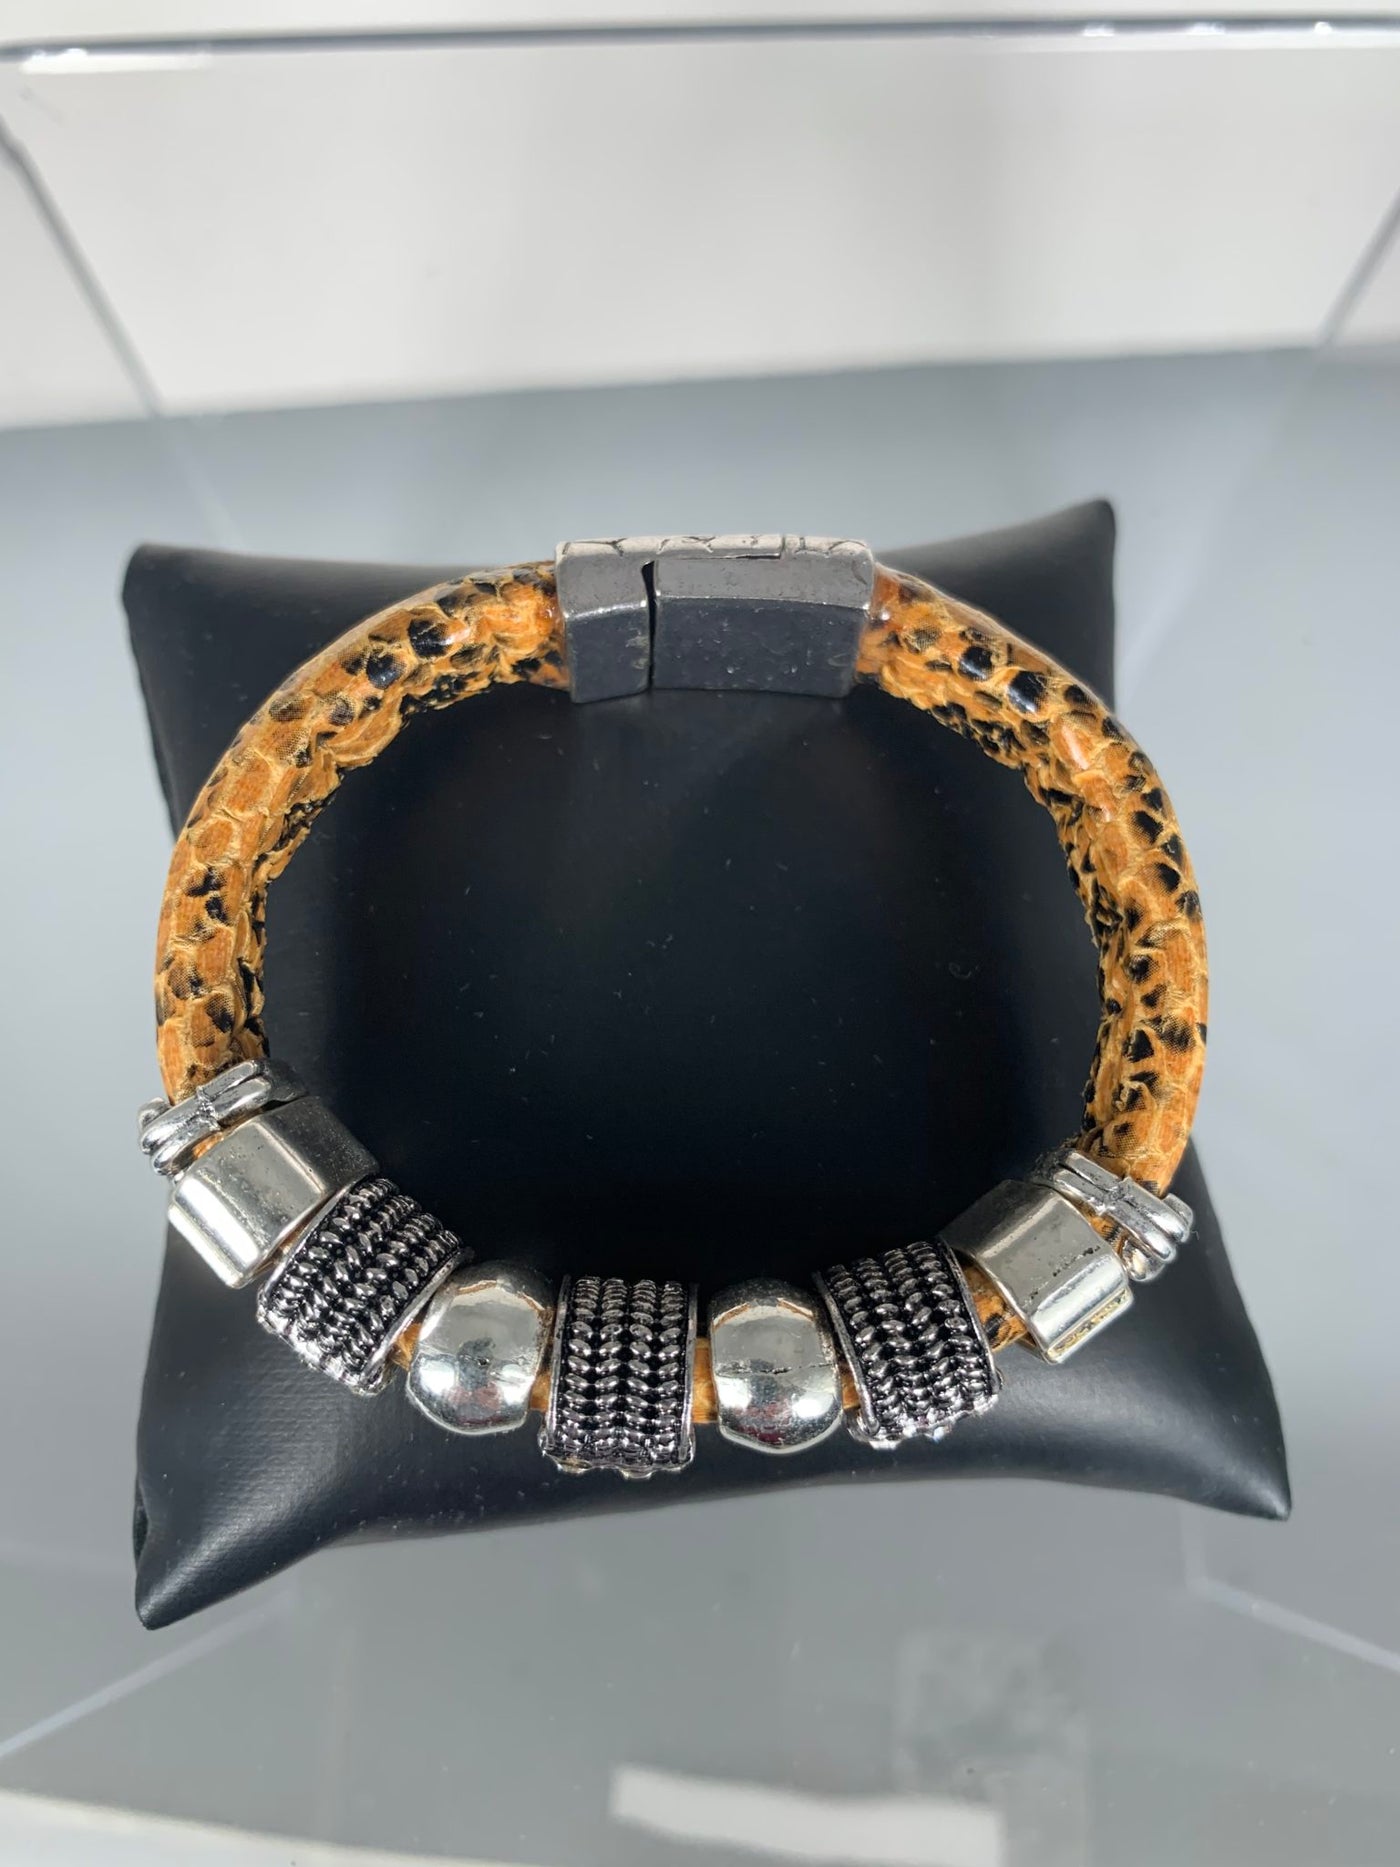 Yellow Faux Snake Skin Band Bracelet with SPARKS